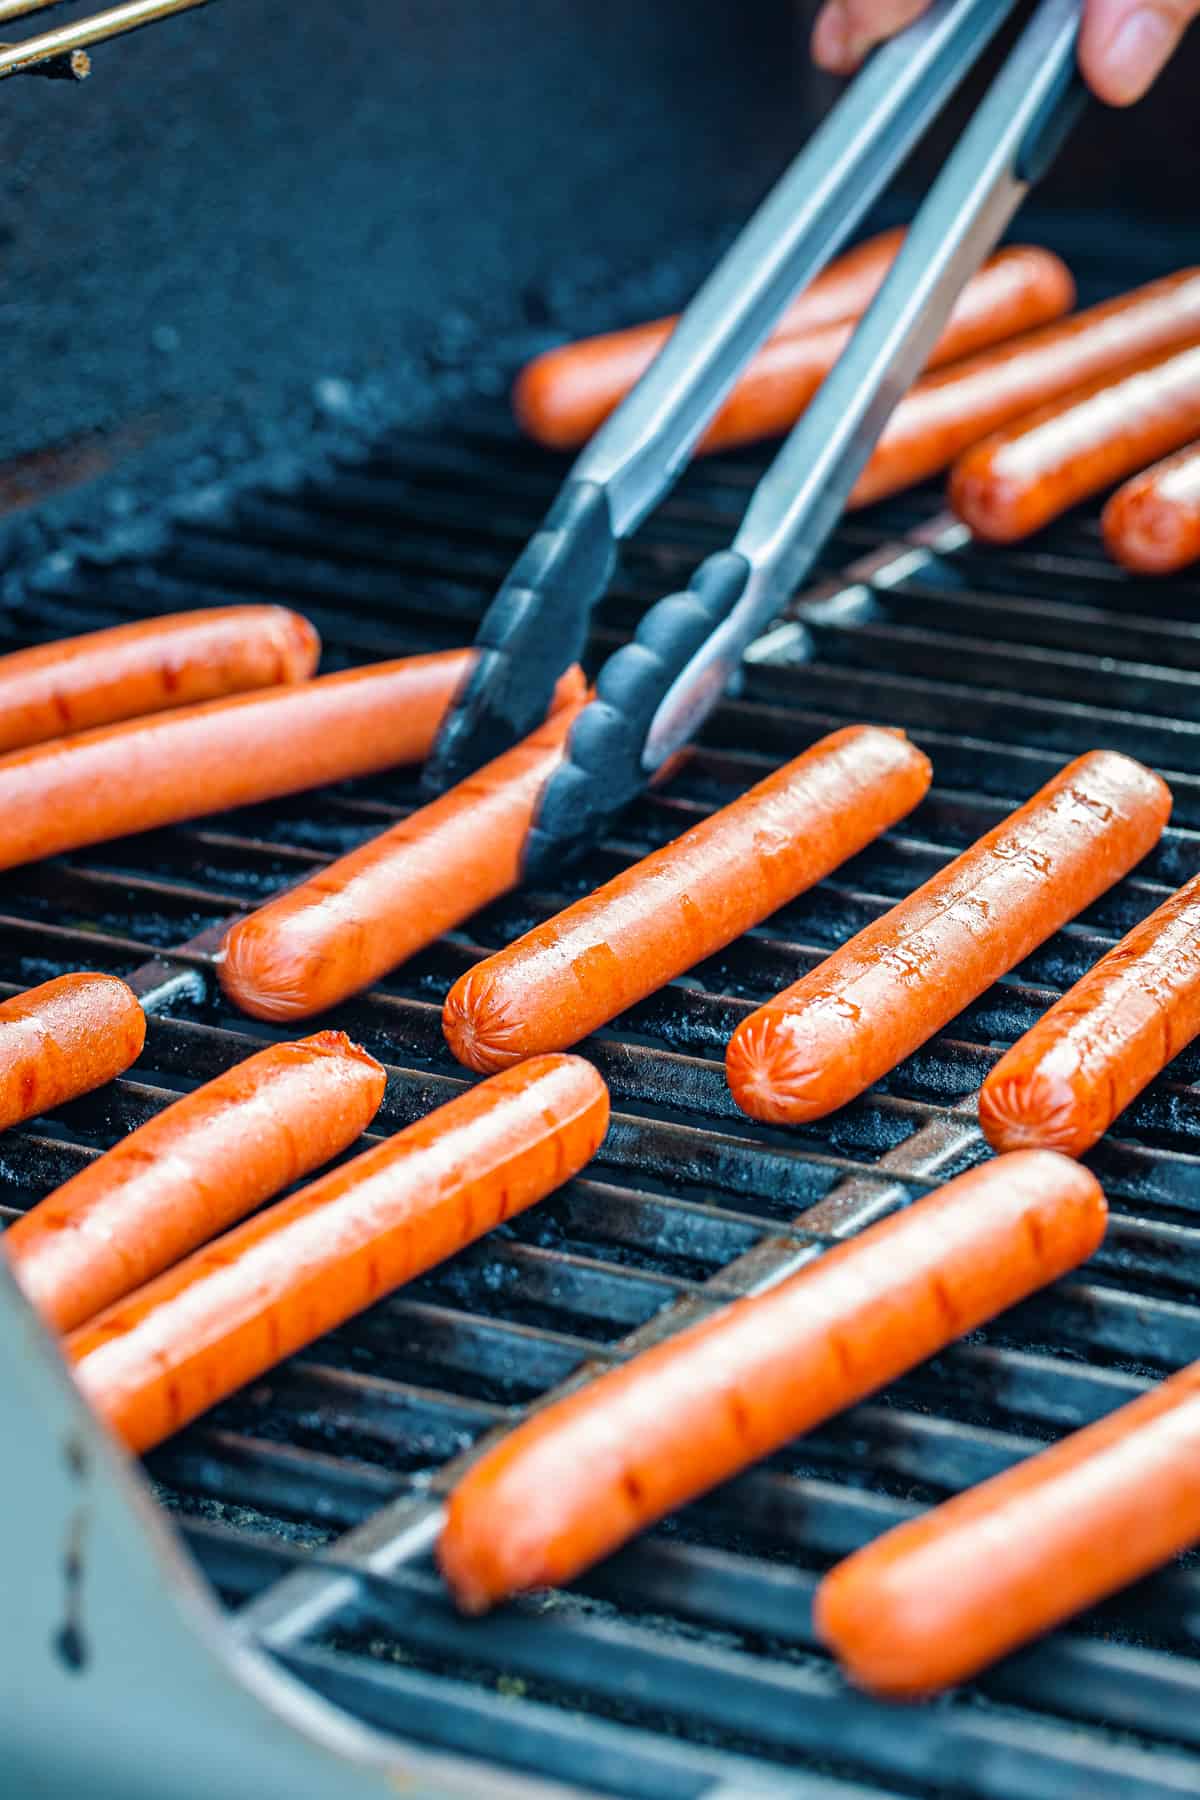 Hot dogs on the grill.